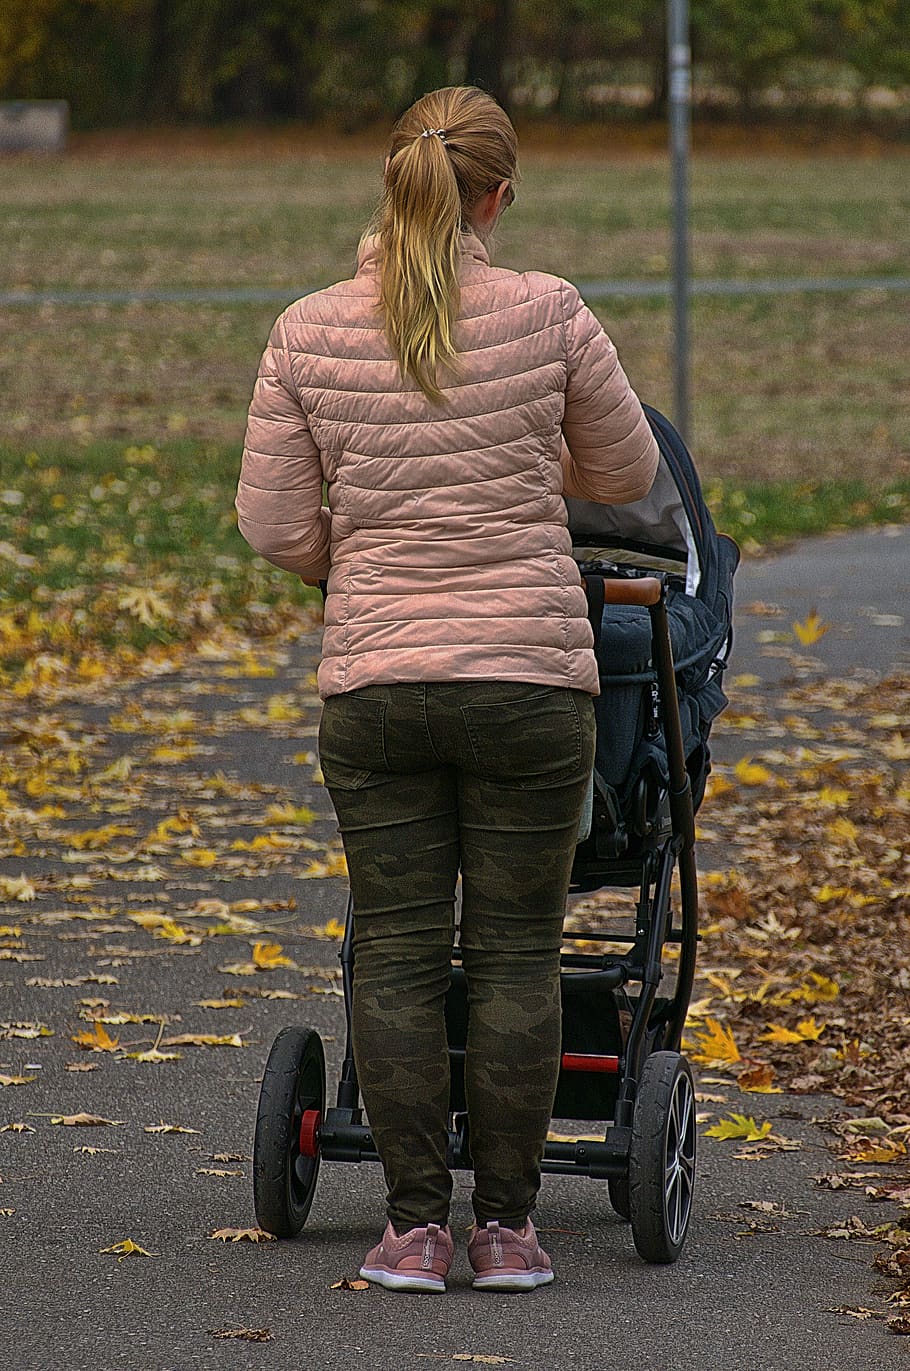 woman, baby carriage, park, autumn, walk, movement, leaf coloring, fall foliage, mood, atmospheric